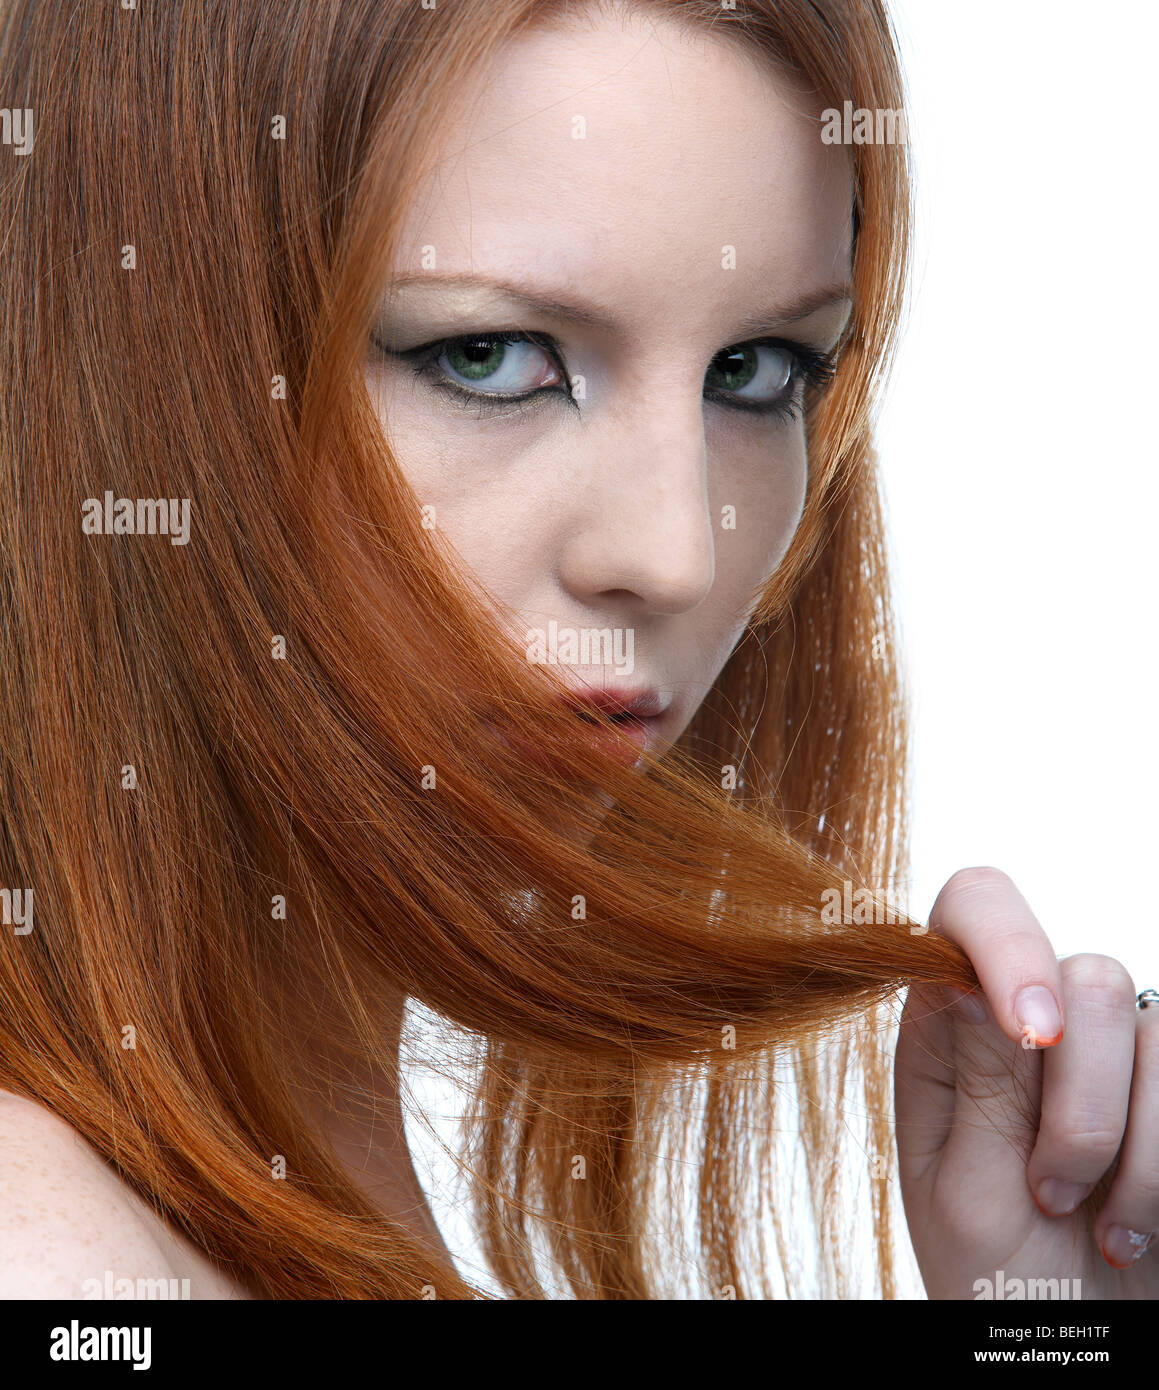 close-up portrait of beautiful redhead pale skinned model hiding her face in hair Stock Photo